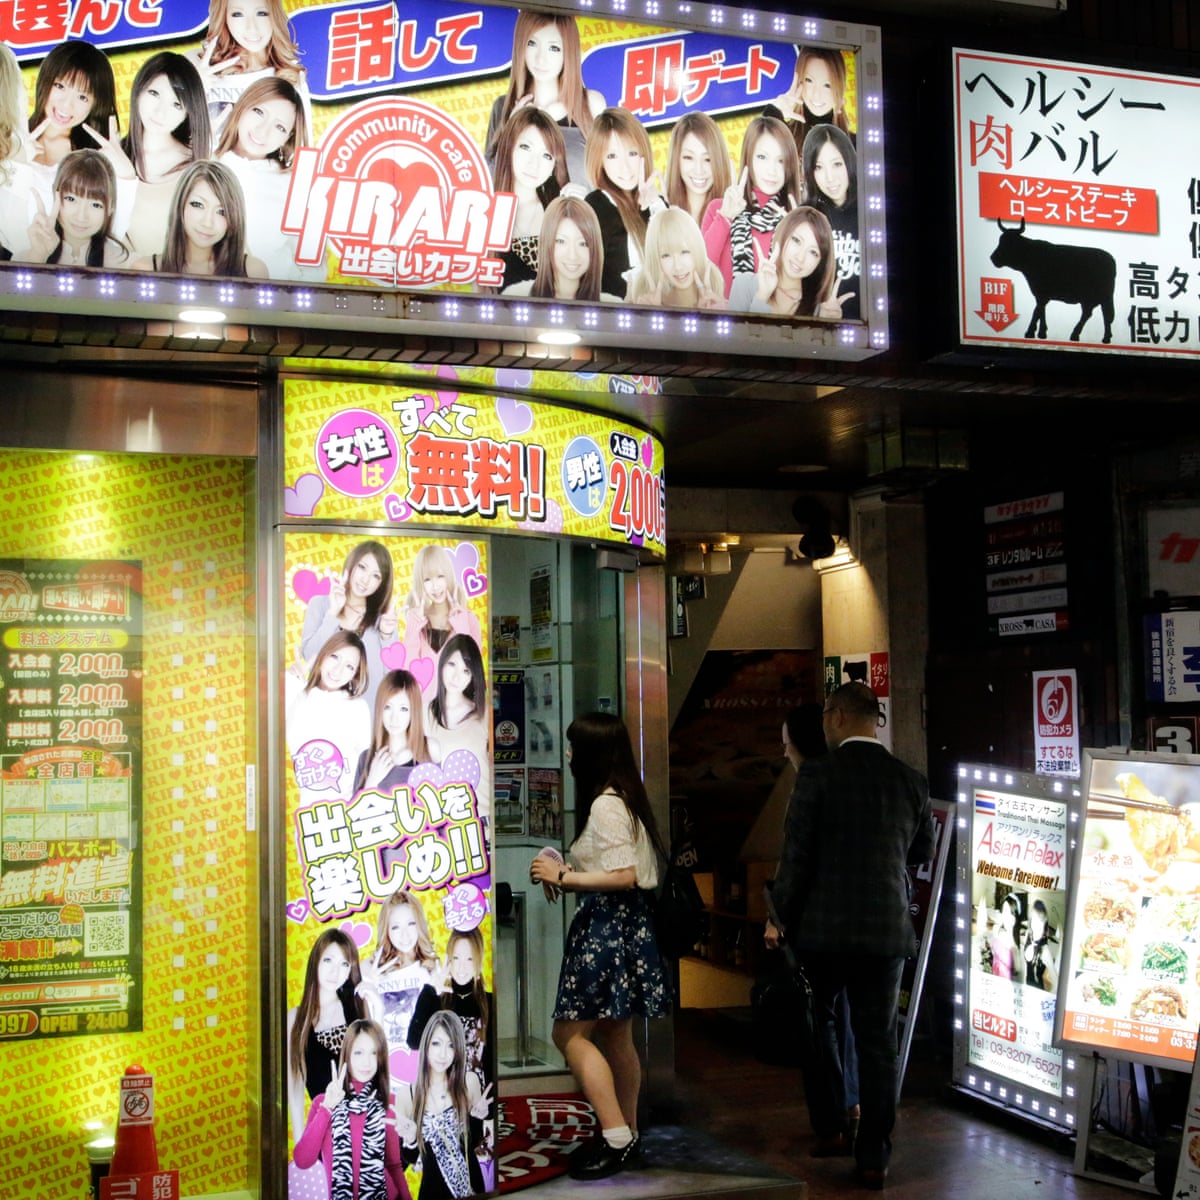 Schoolgirls for sale: why Tokyo struggles to stop the 'JK business' |  Cities | The Guardian